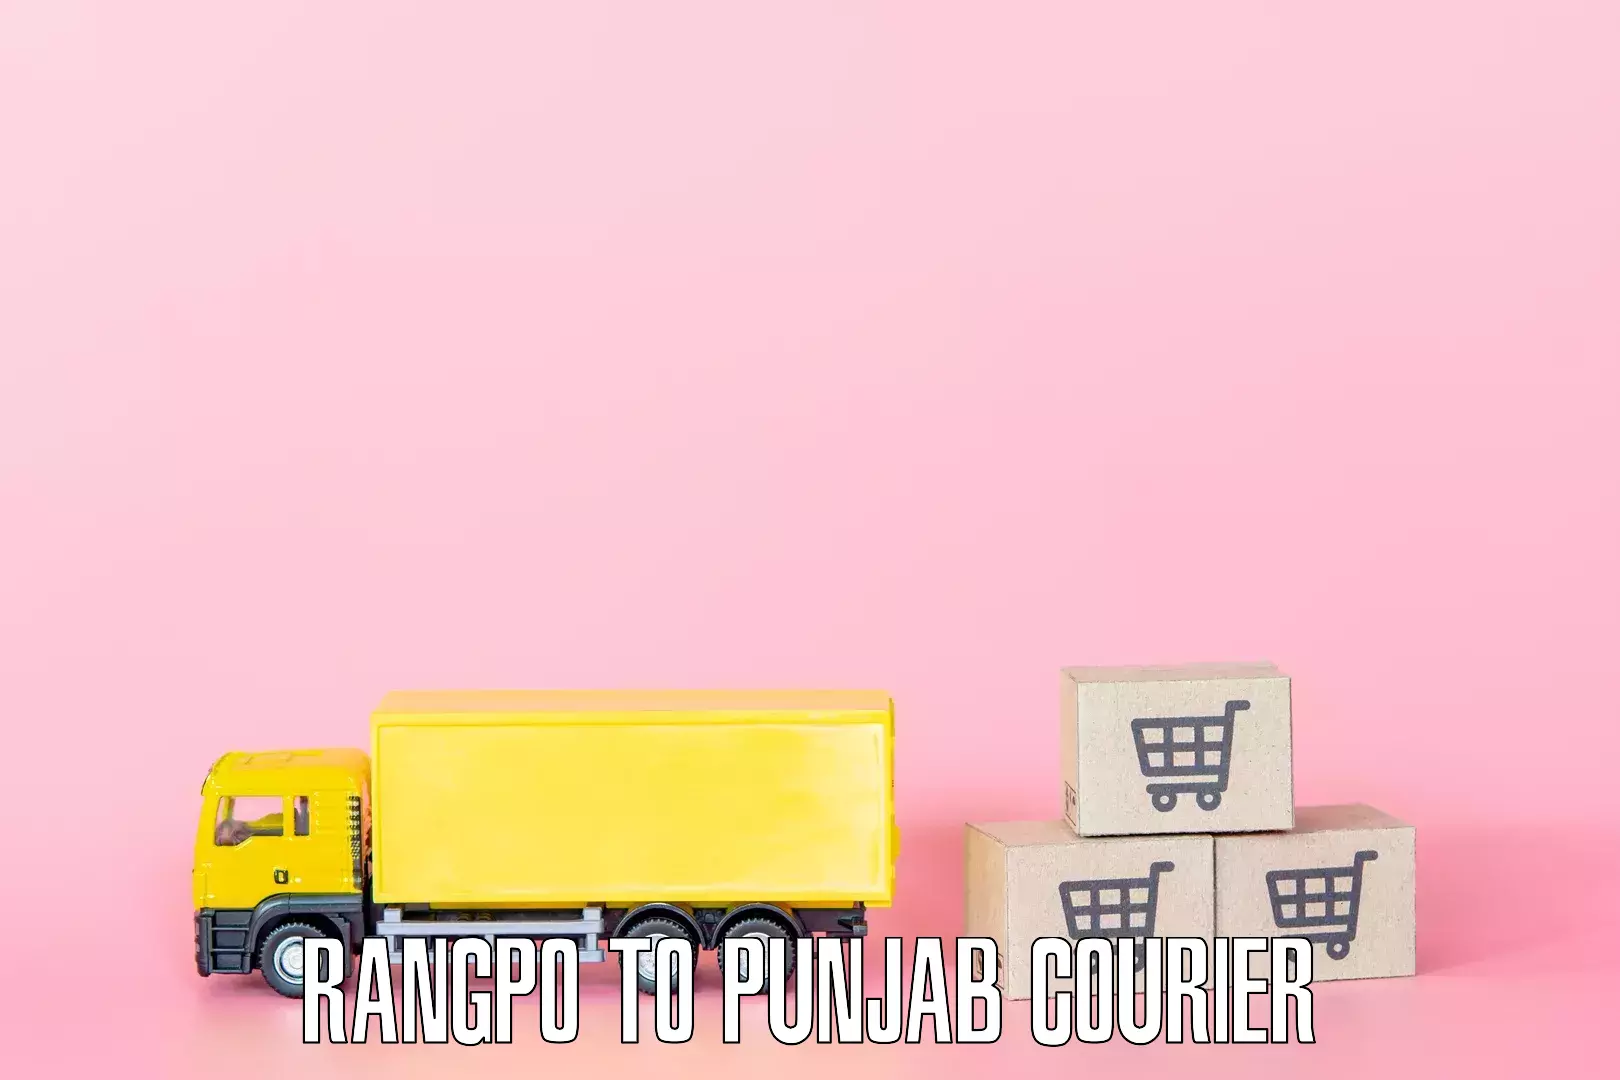 Tailored moving packages Rangpo to Punjab